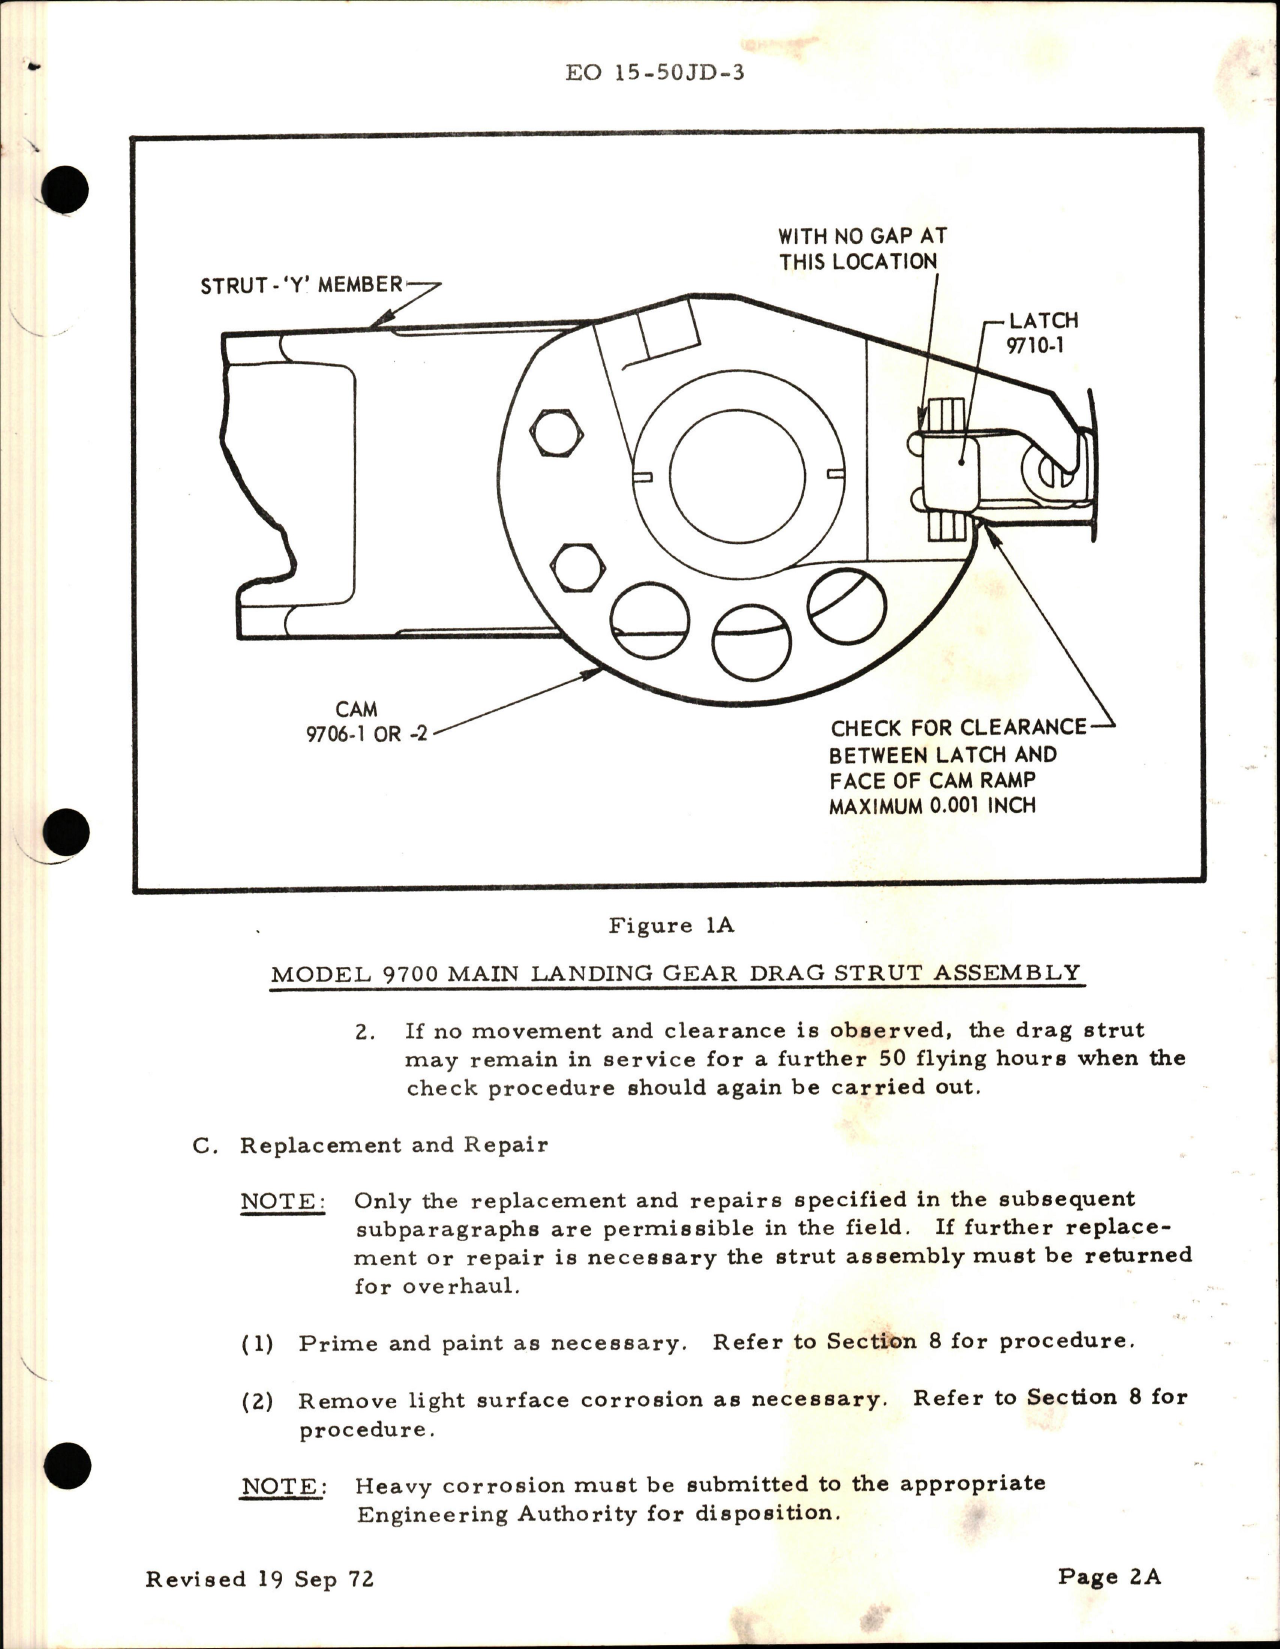 Sample page 7 from AirCorps Library document: Parts List for Main Landing Gear Drag Strut Assembly - Parts 9700-5 and 9700-9 